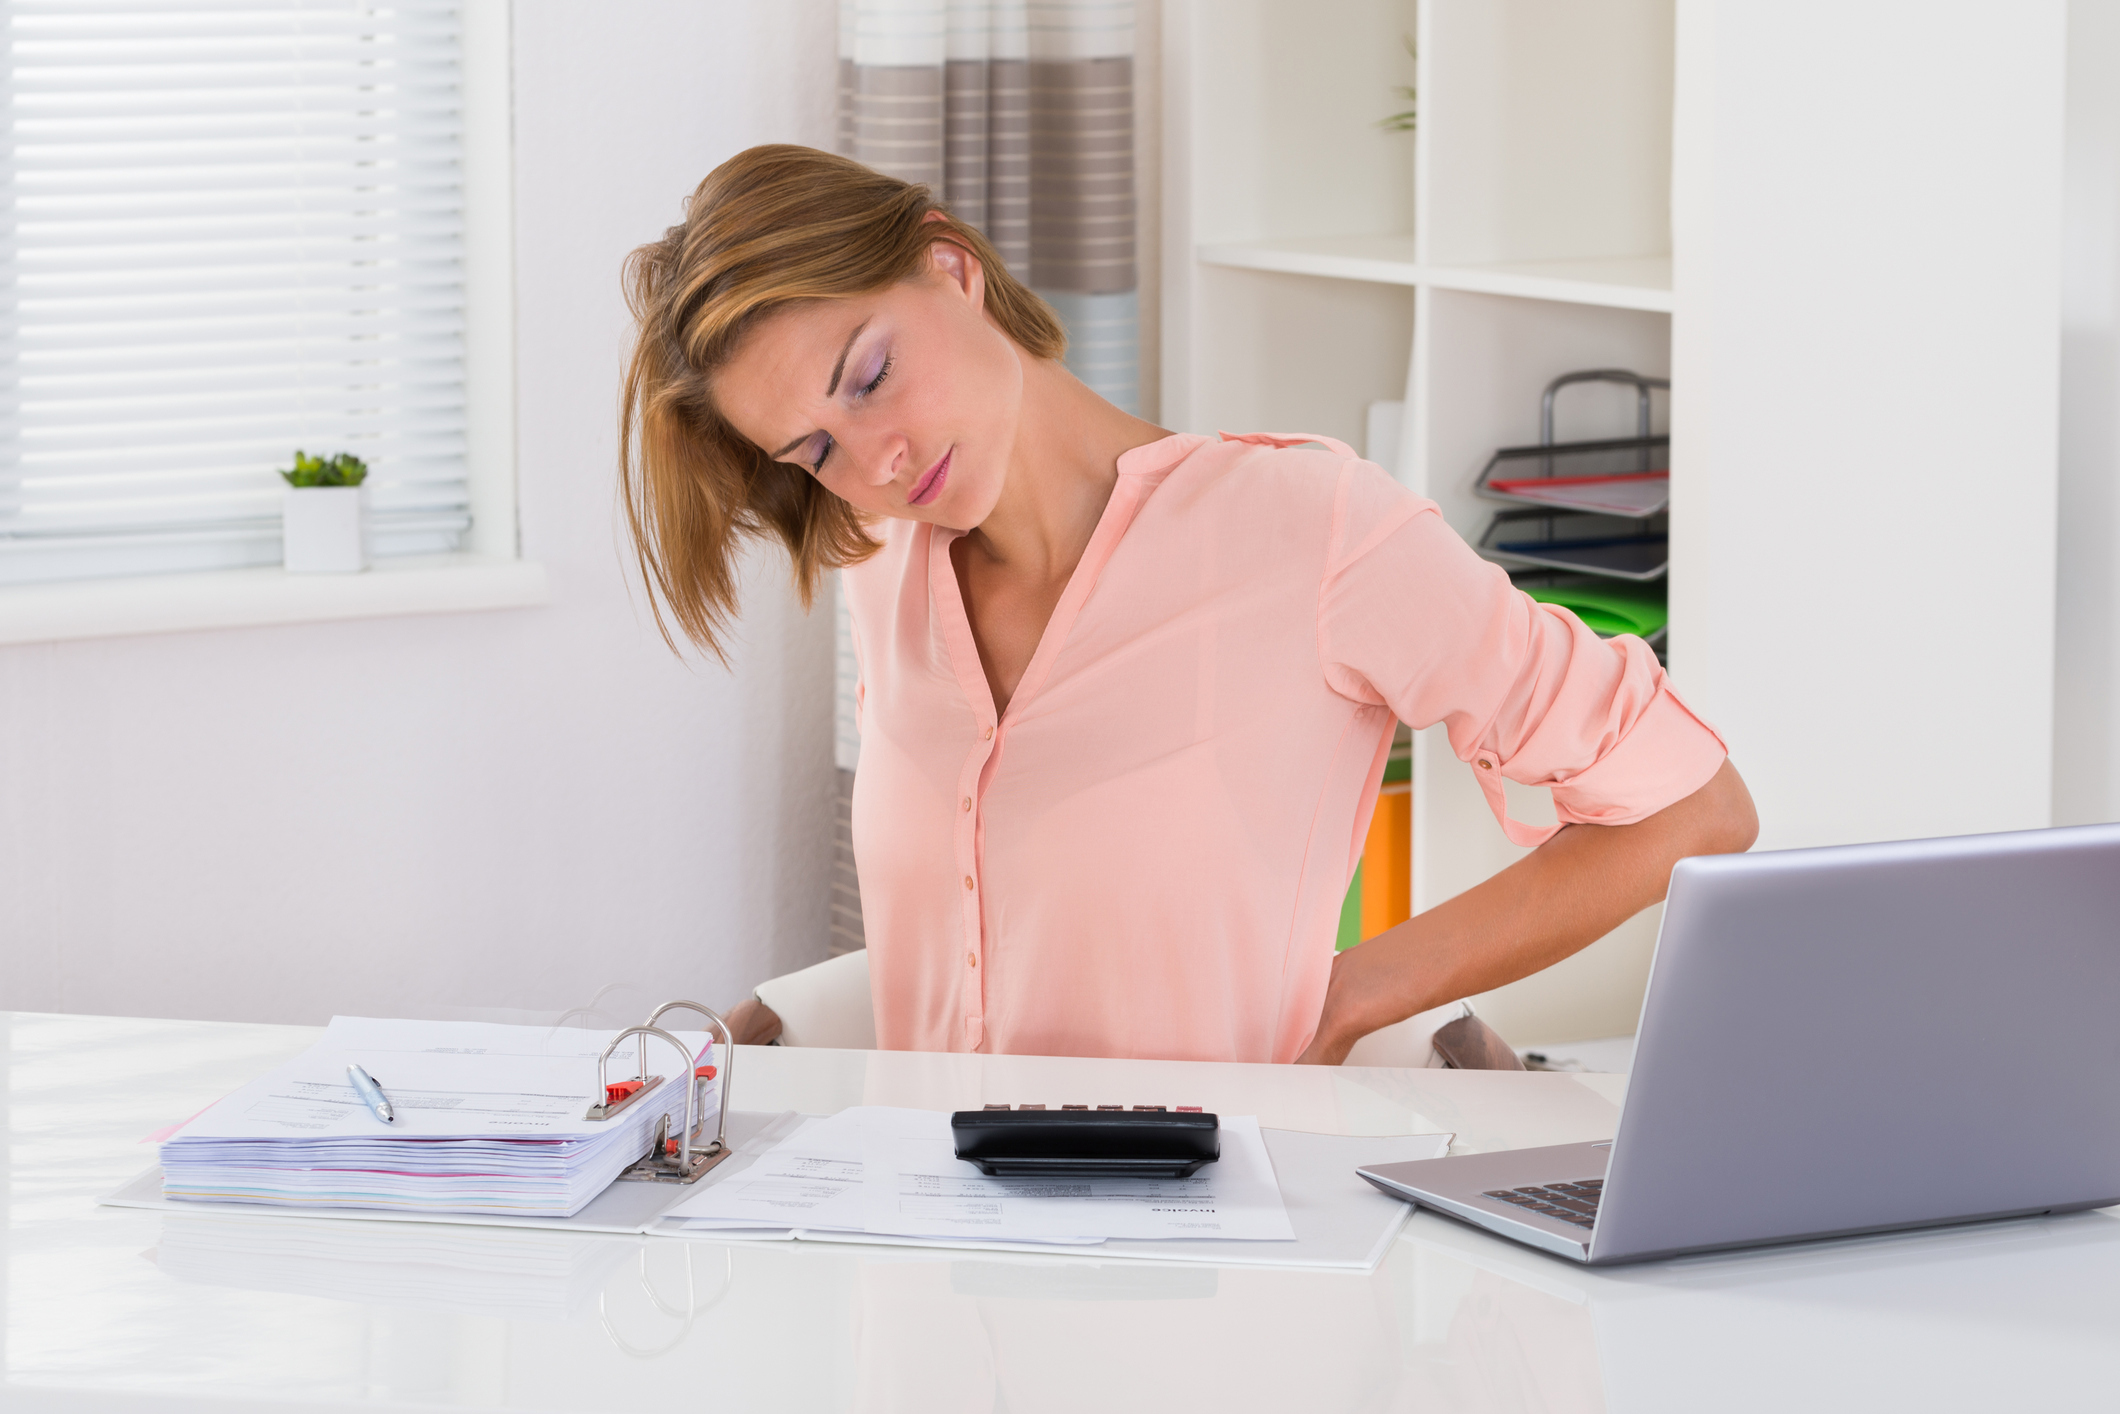 Ensureyou have a good posture if you sit at a desk all day (Thinkstock/PA)